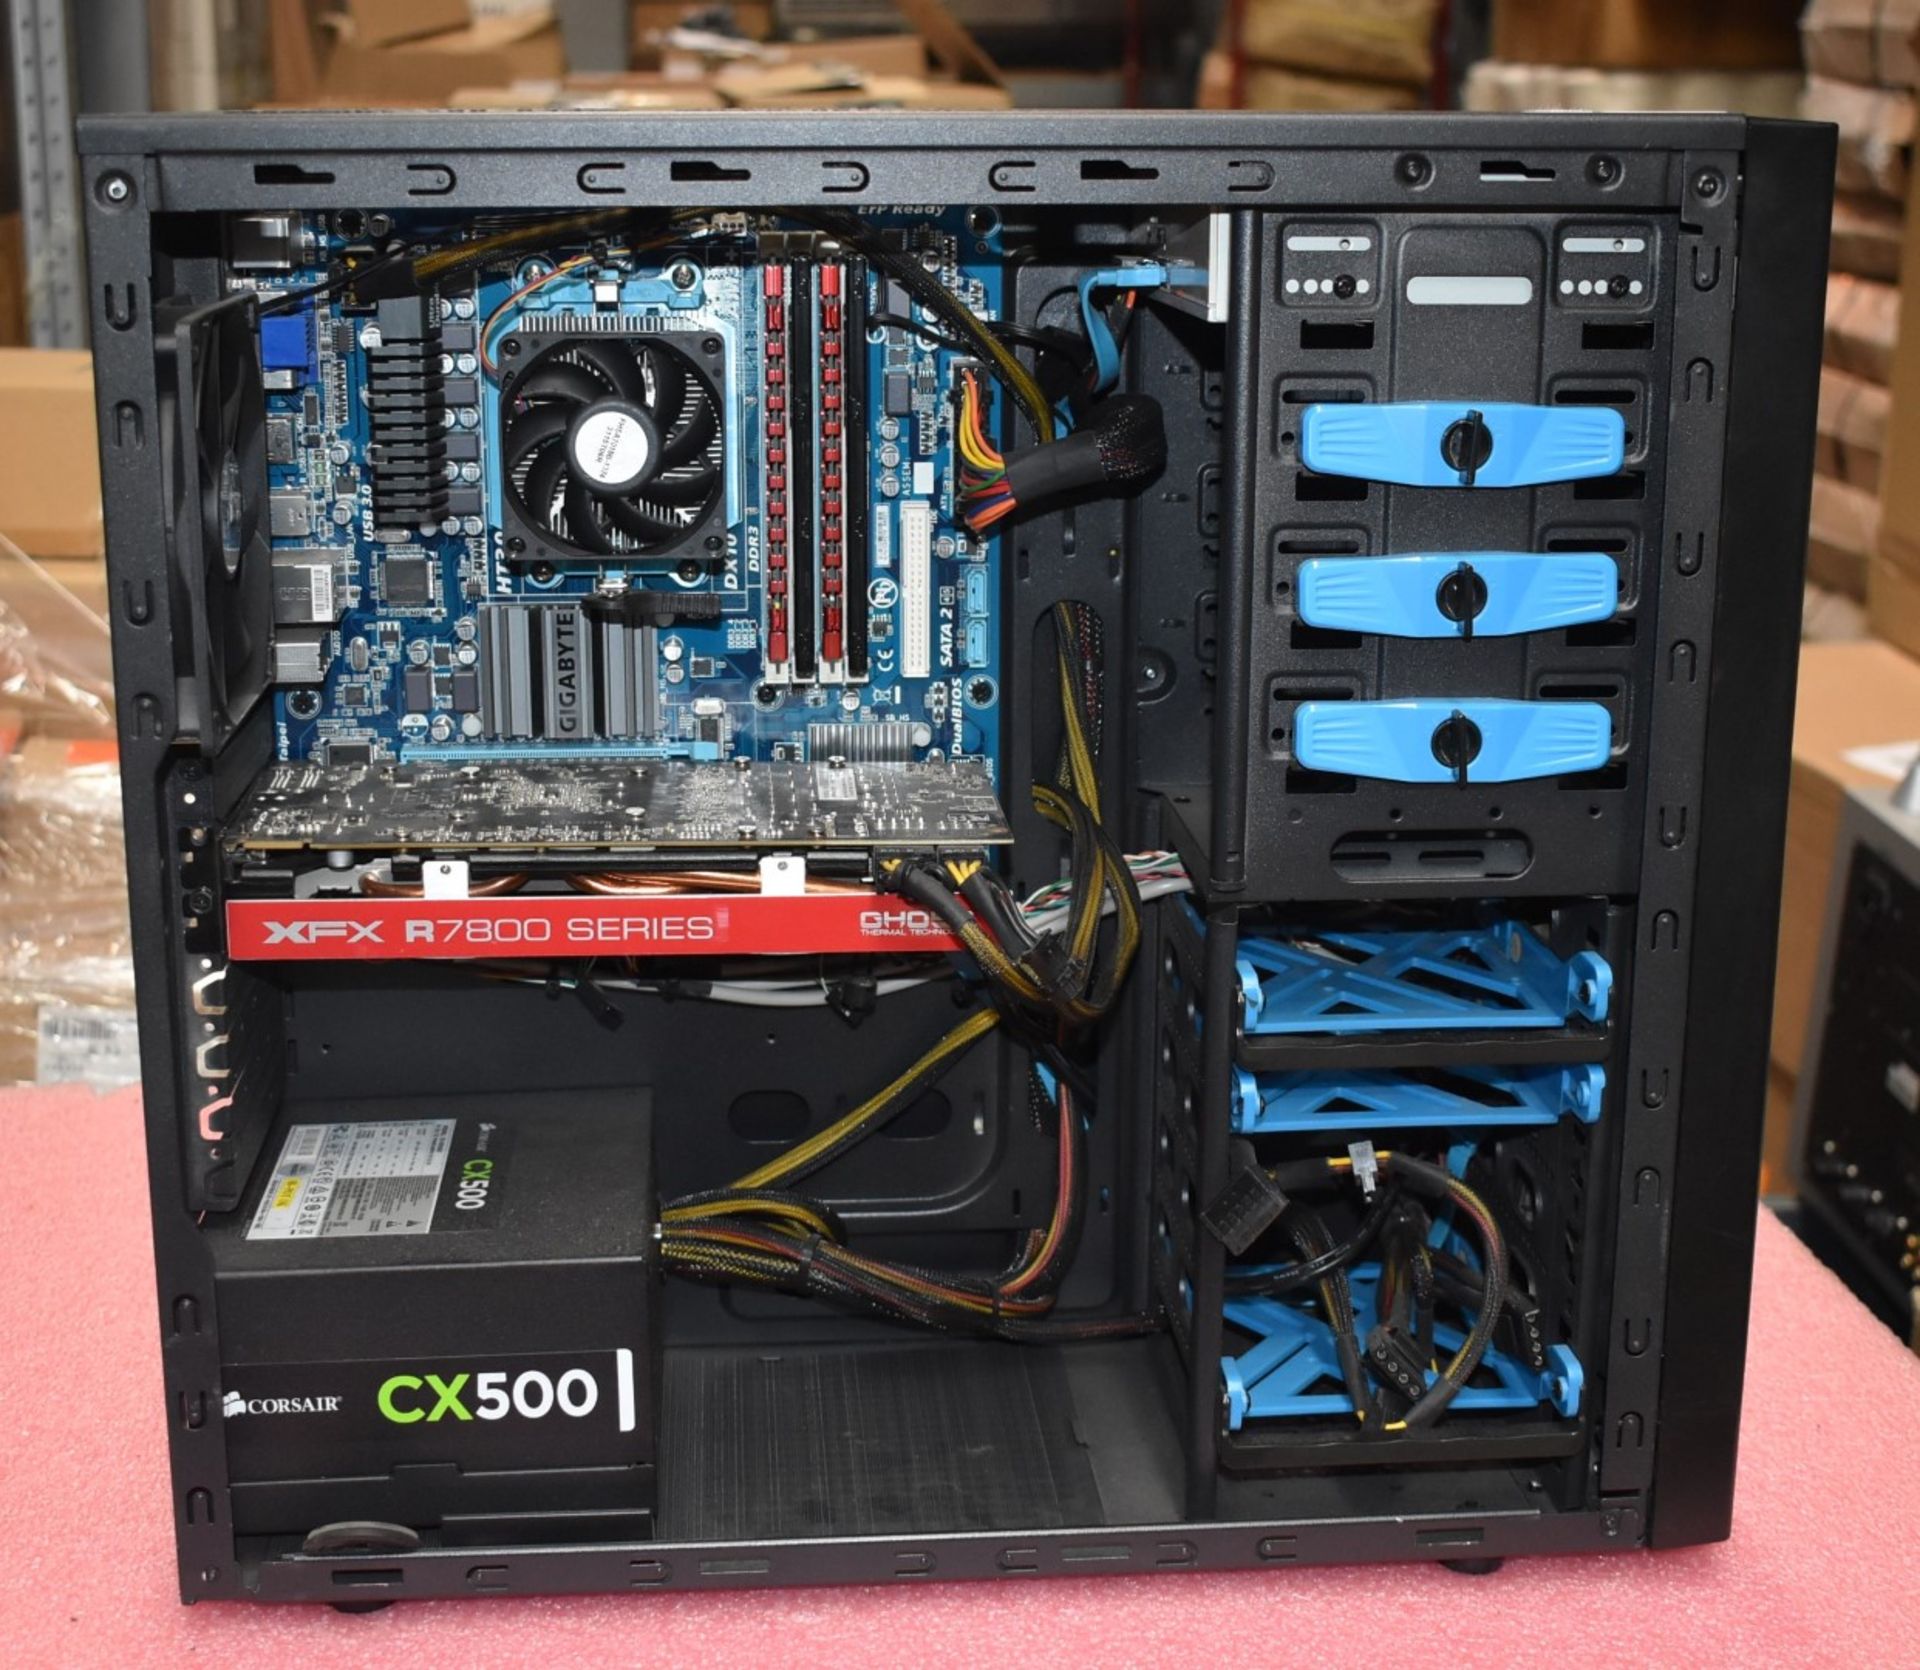 1 x Desktop Gaming PC Featuring an AMD FX6300 Processor, 12GB Ram and an XFX Radeon 7890 Graphics - Image 5 of 10